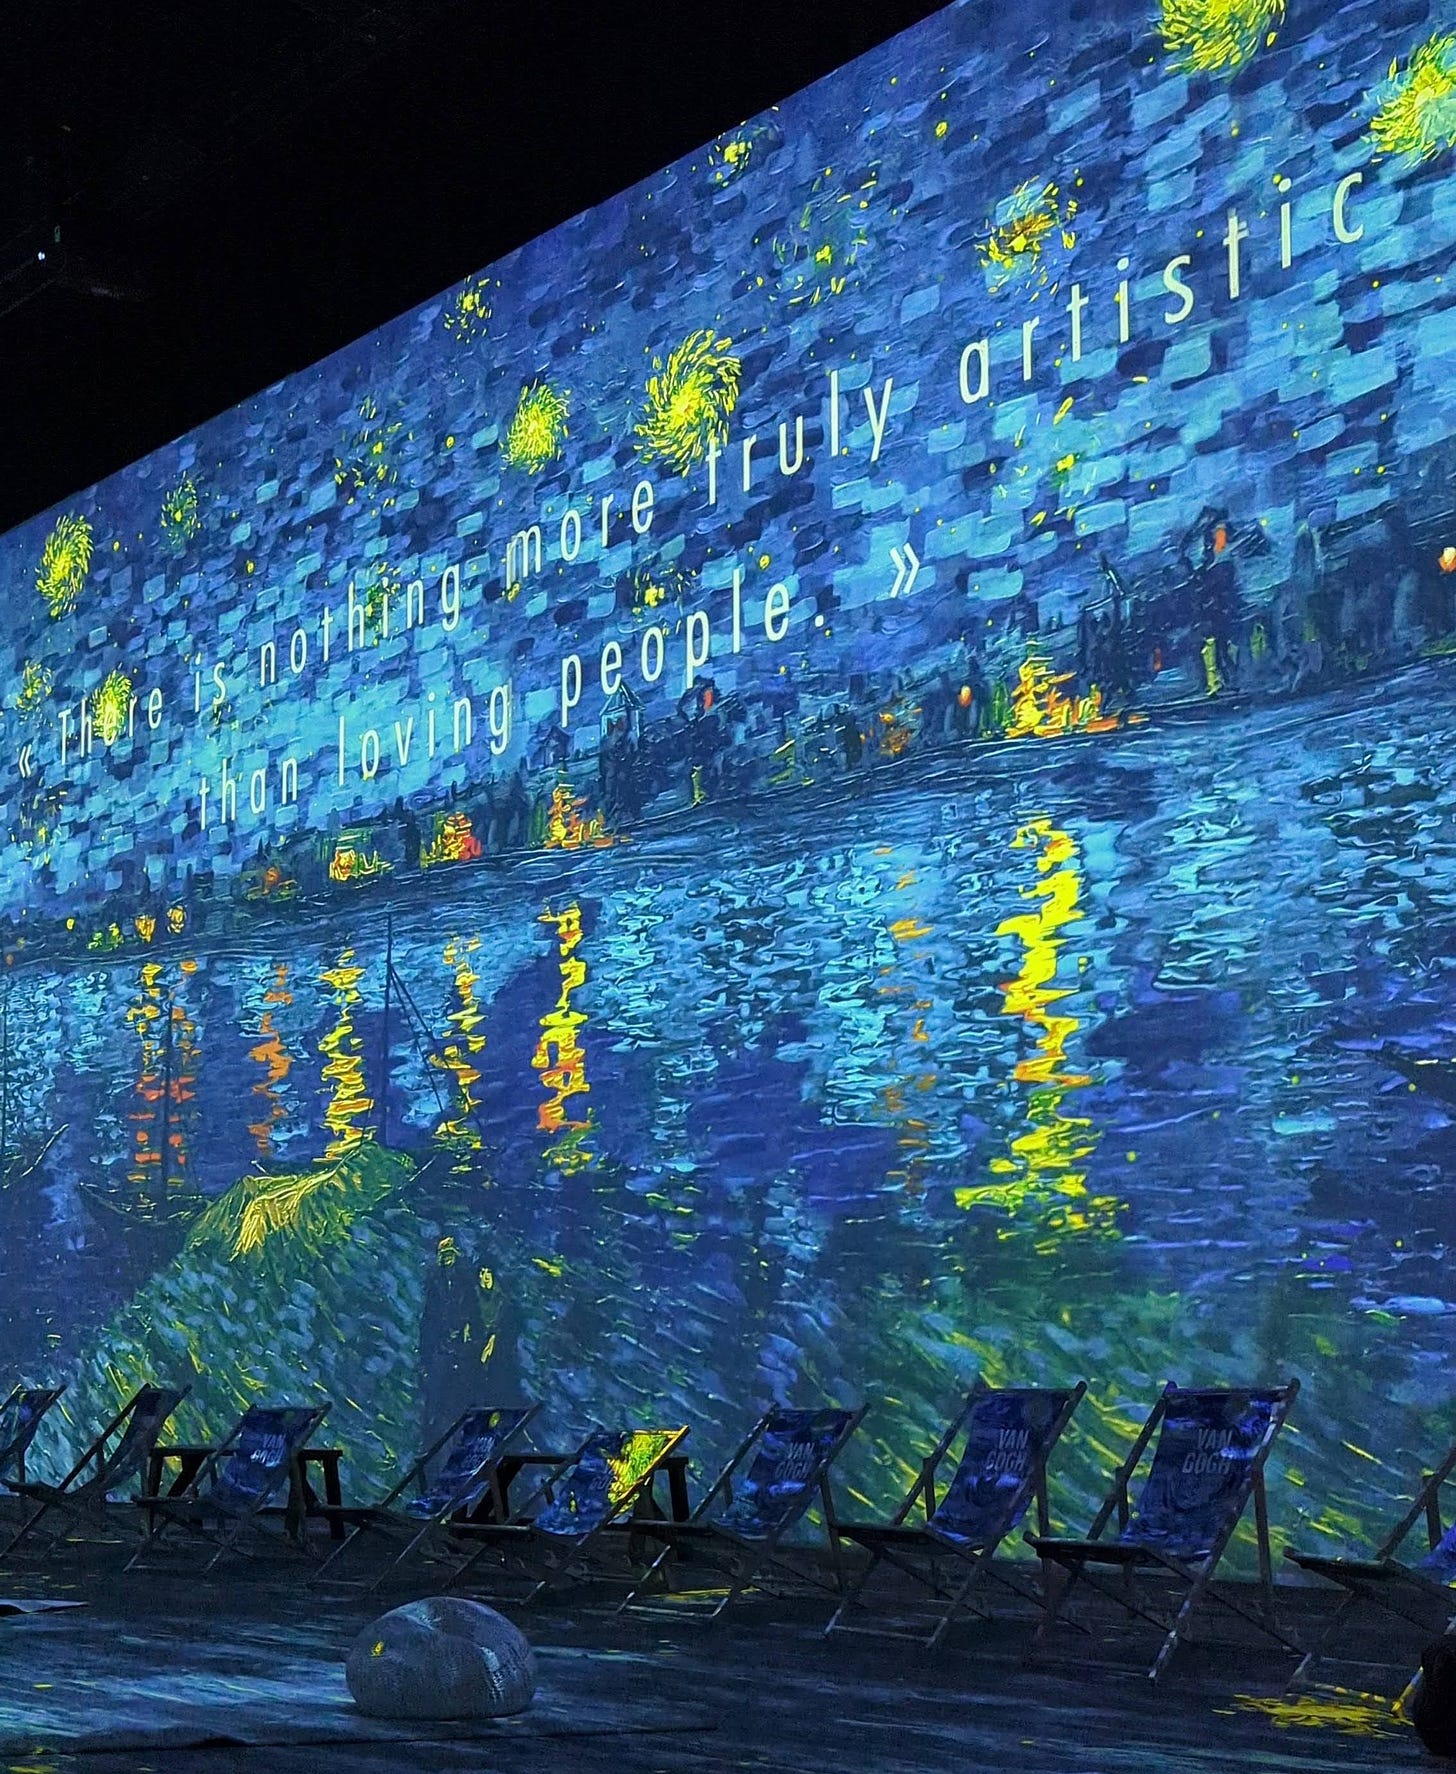 Photo taken at the Van Gogh Exhibit in the room with his art projected onto the walls.